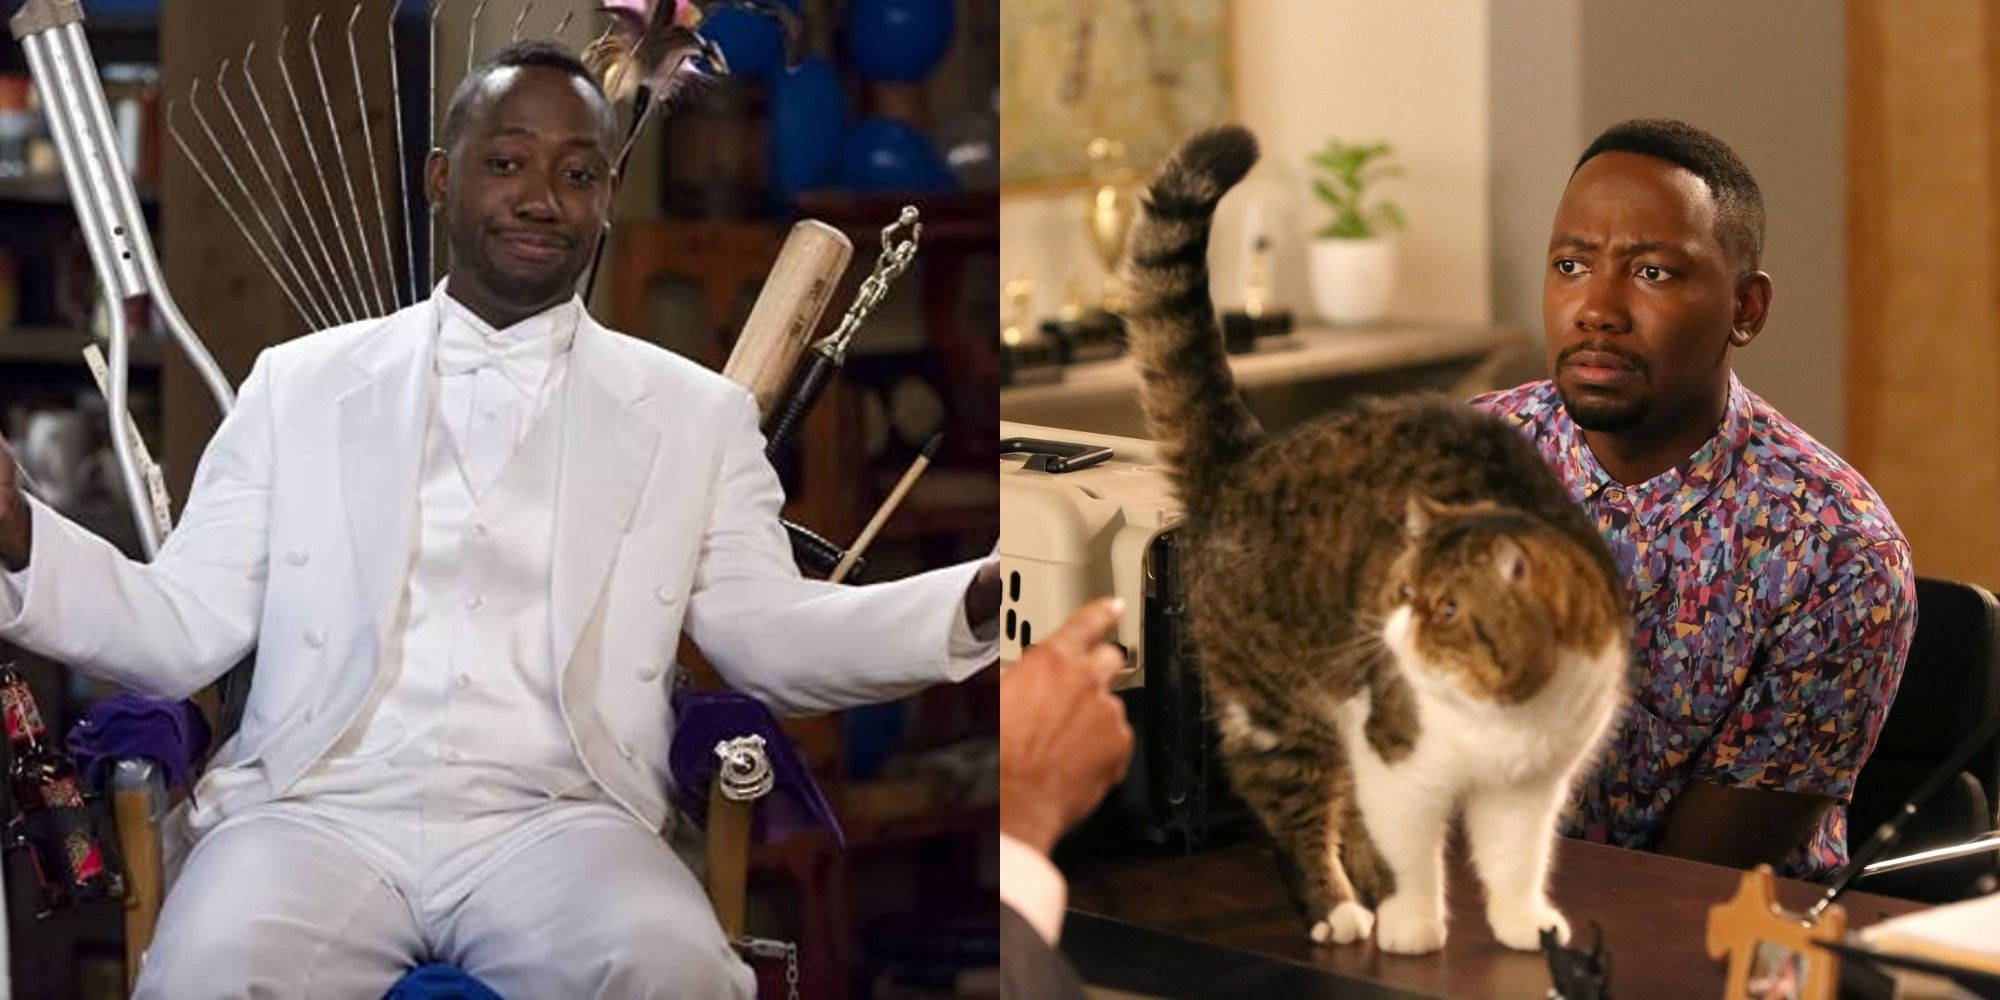 Split image showing Winston in a suit and with Ferguson in New Girl